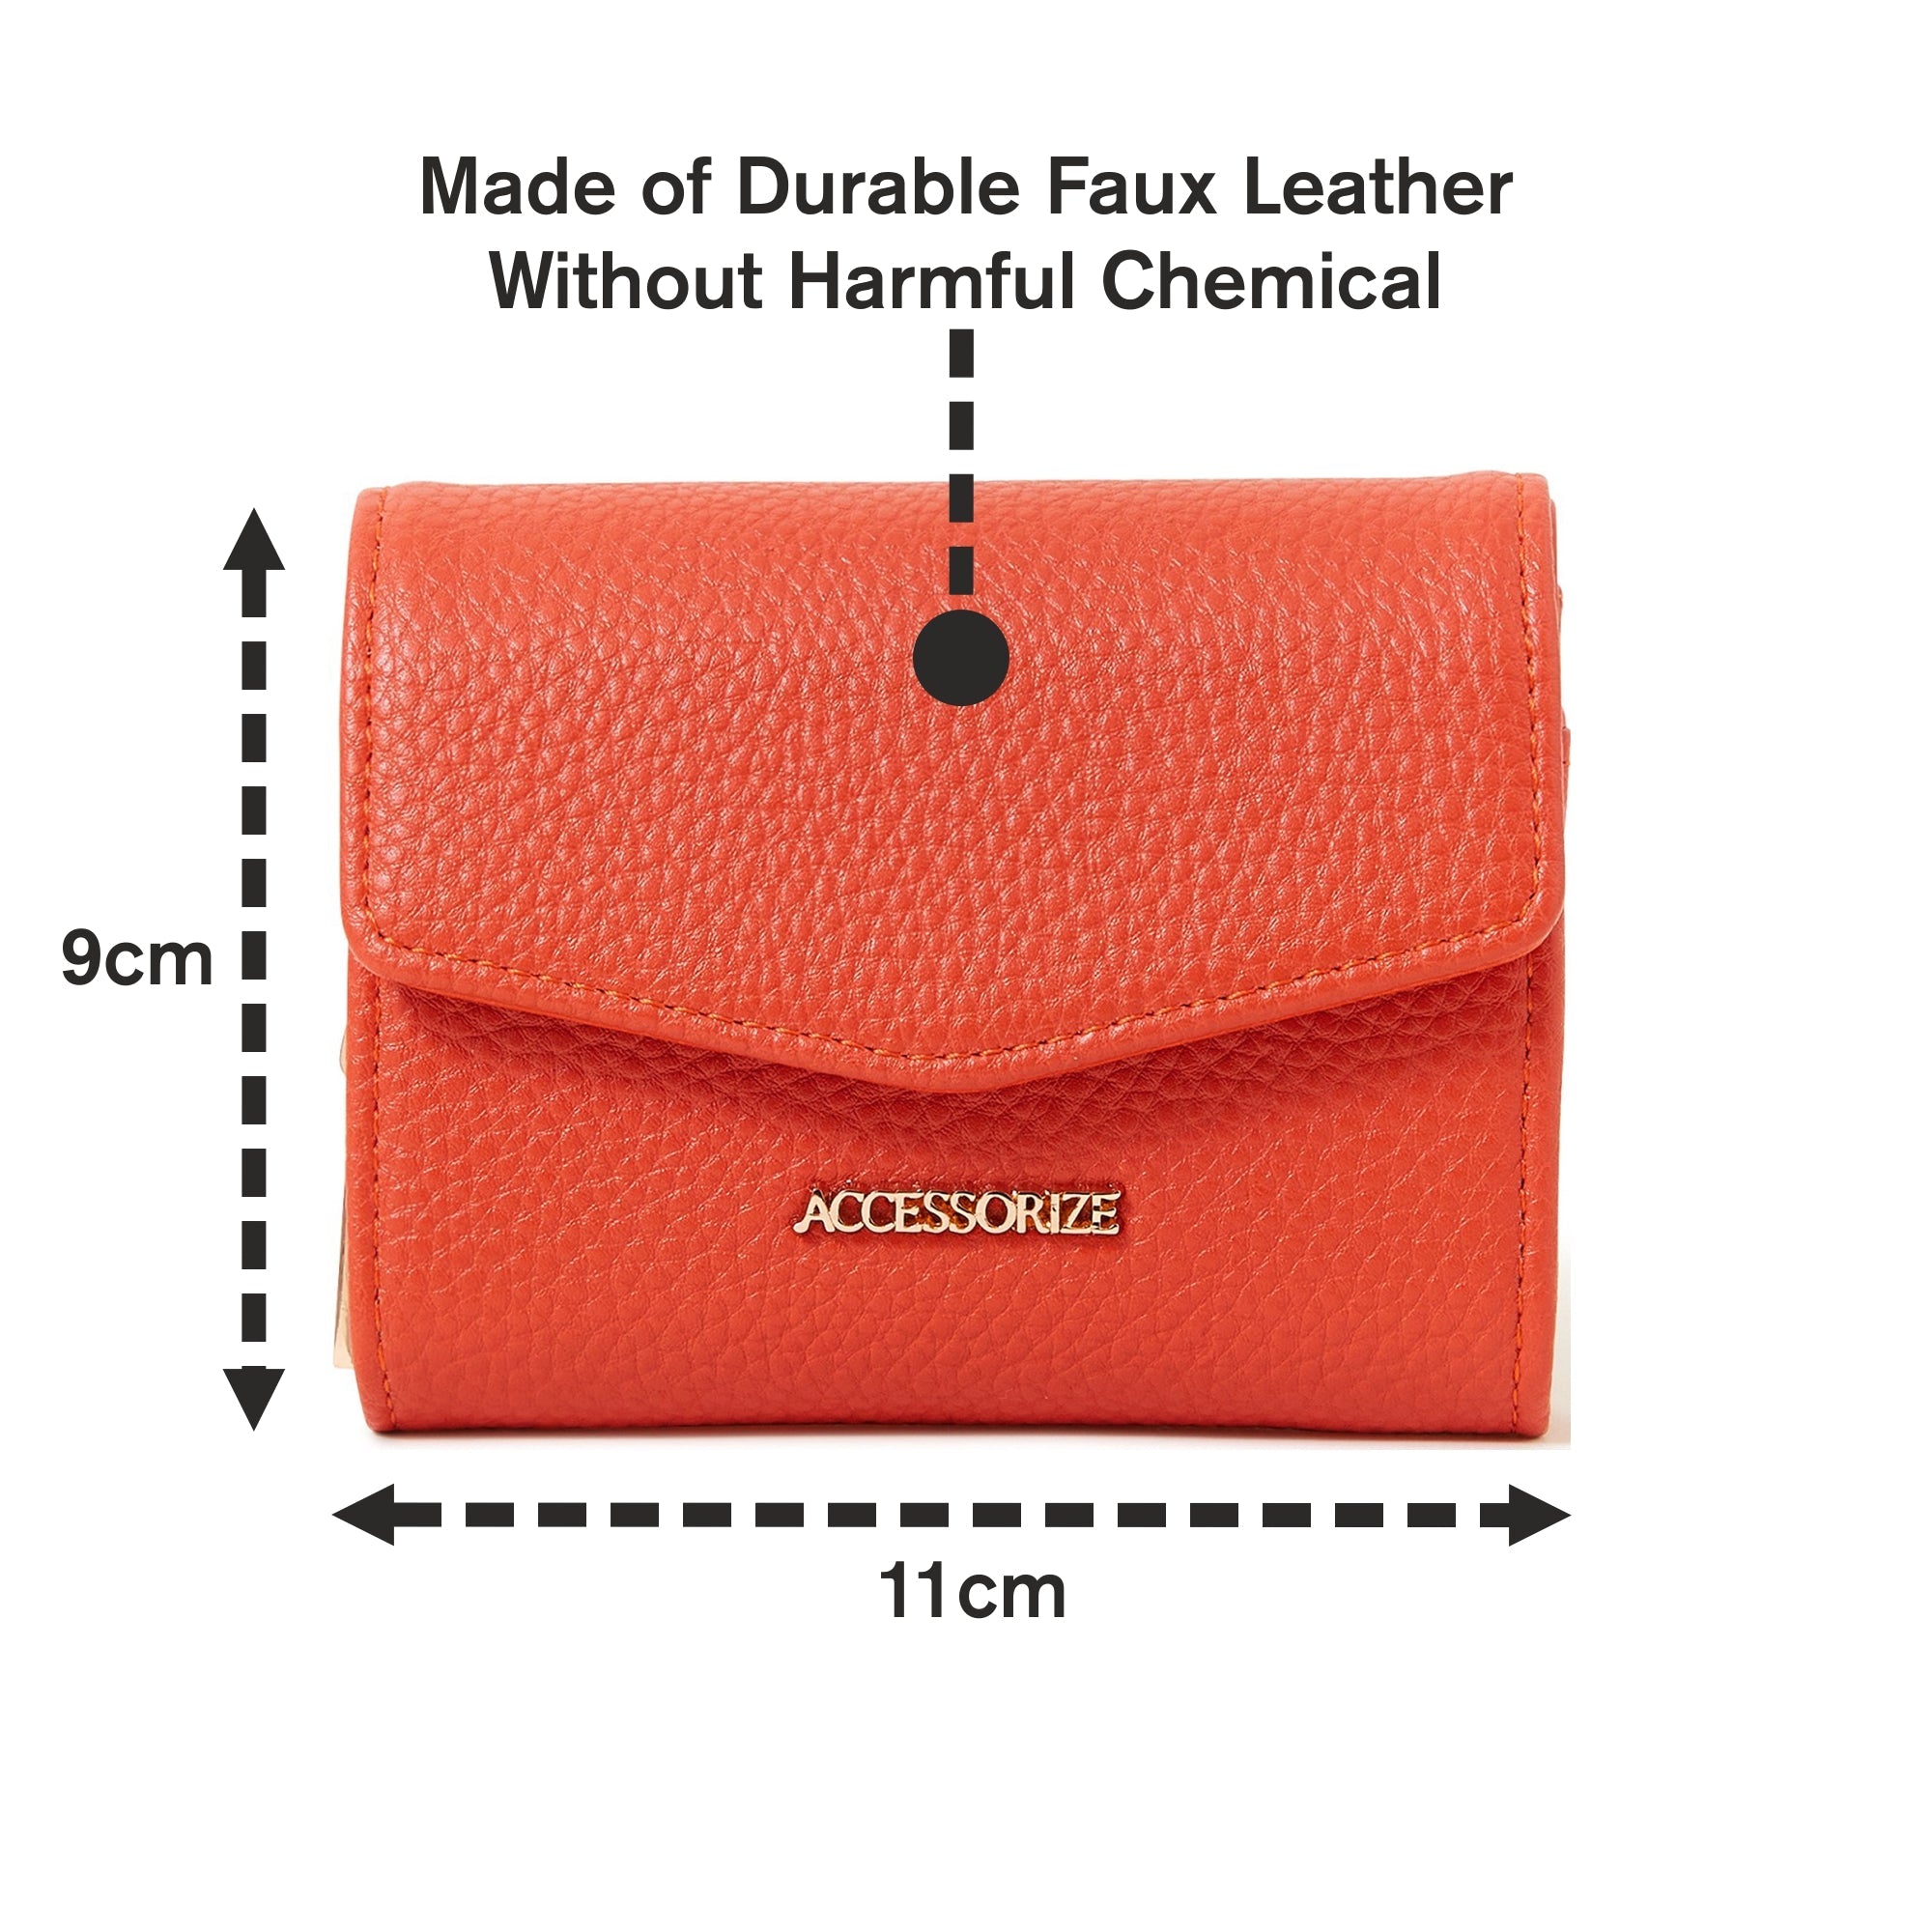 Accessorize London Women's Faux Leather Orang Small Flap Zip Around Purse